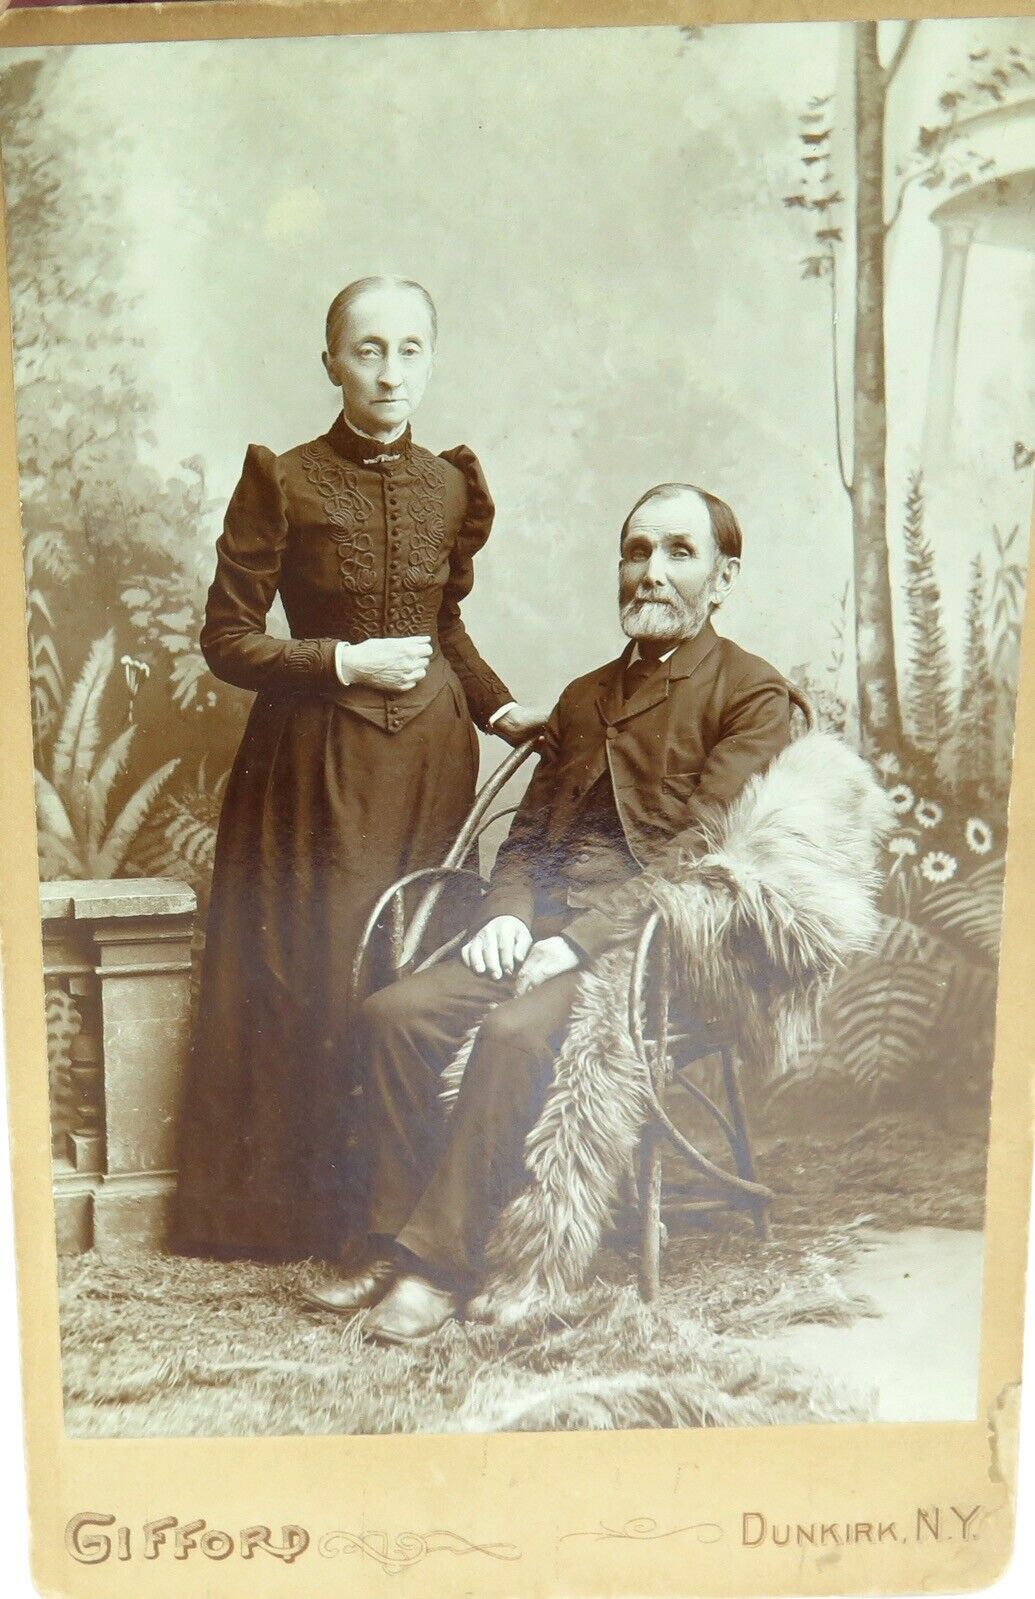 .c1880s LARGE STUDIO PHOTO by GIFFORD, DUNKIRK, NEW YORK. Mr & Mrs DOTY 